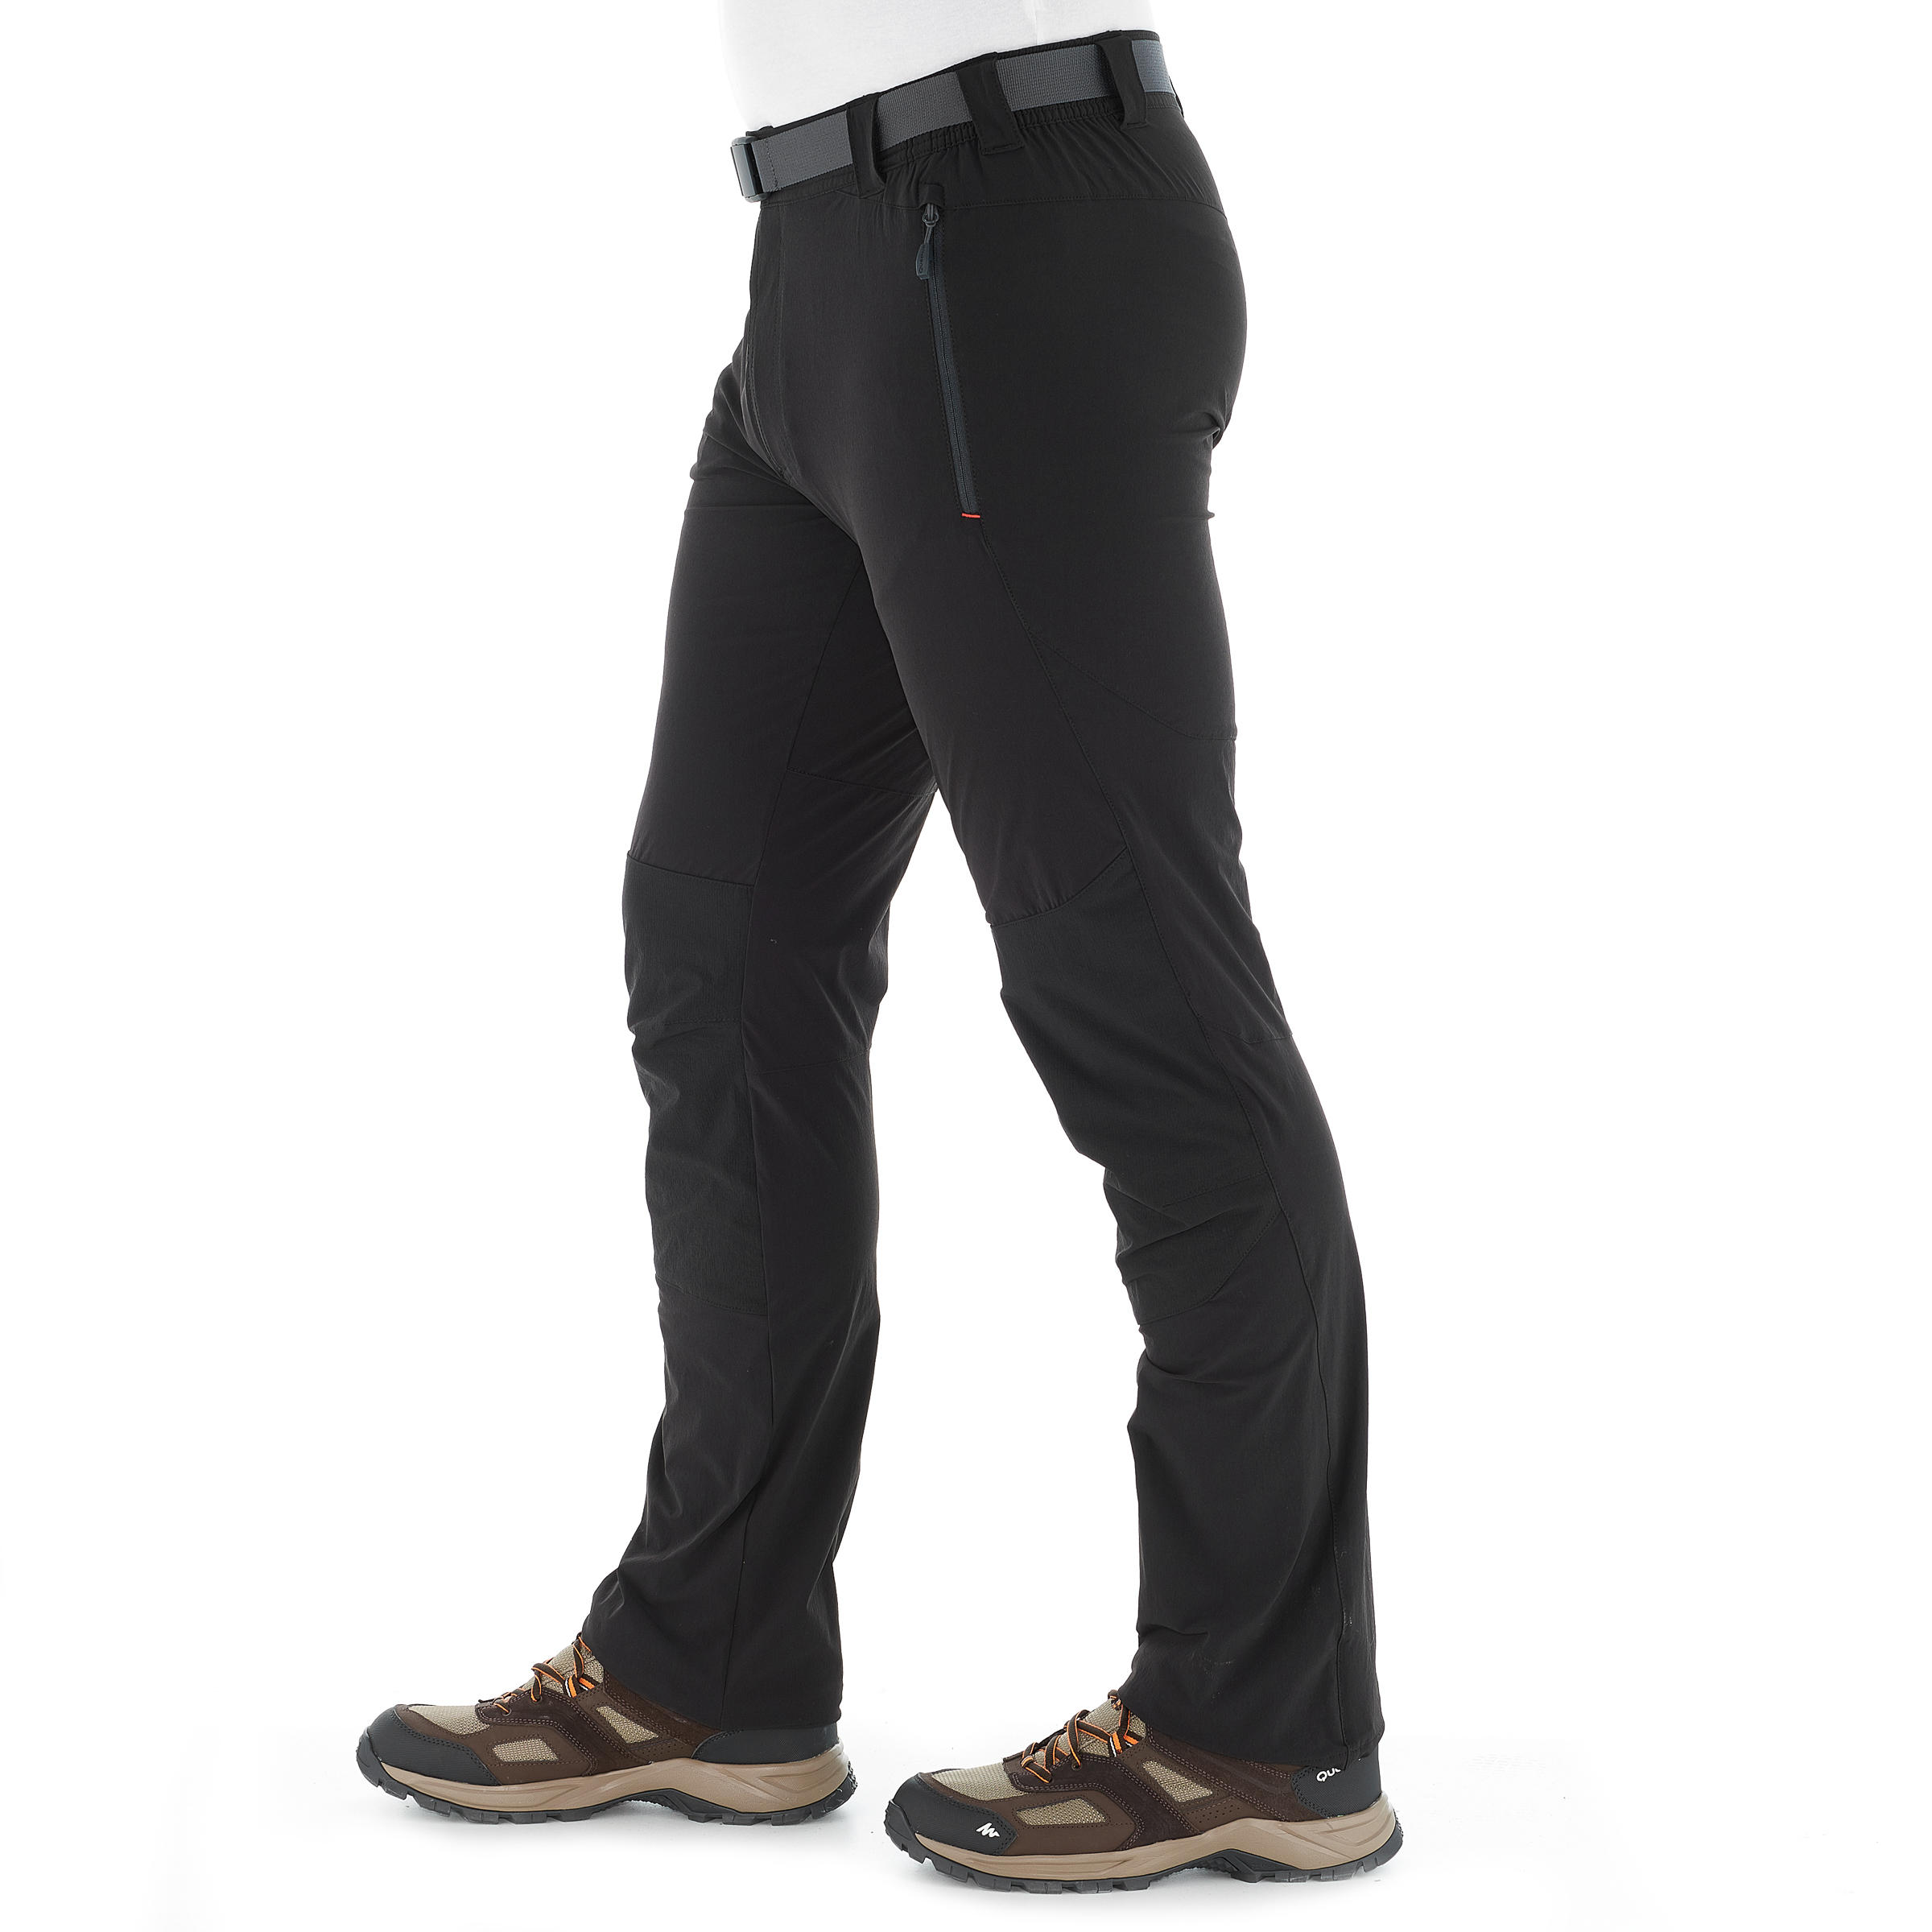 Buy QUECHUA Mens FORCLAZ 500 Hiking Trousers Black W28 L30 Online at Low  Prices in India  Amazonin